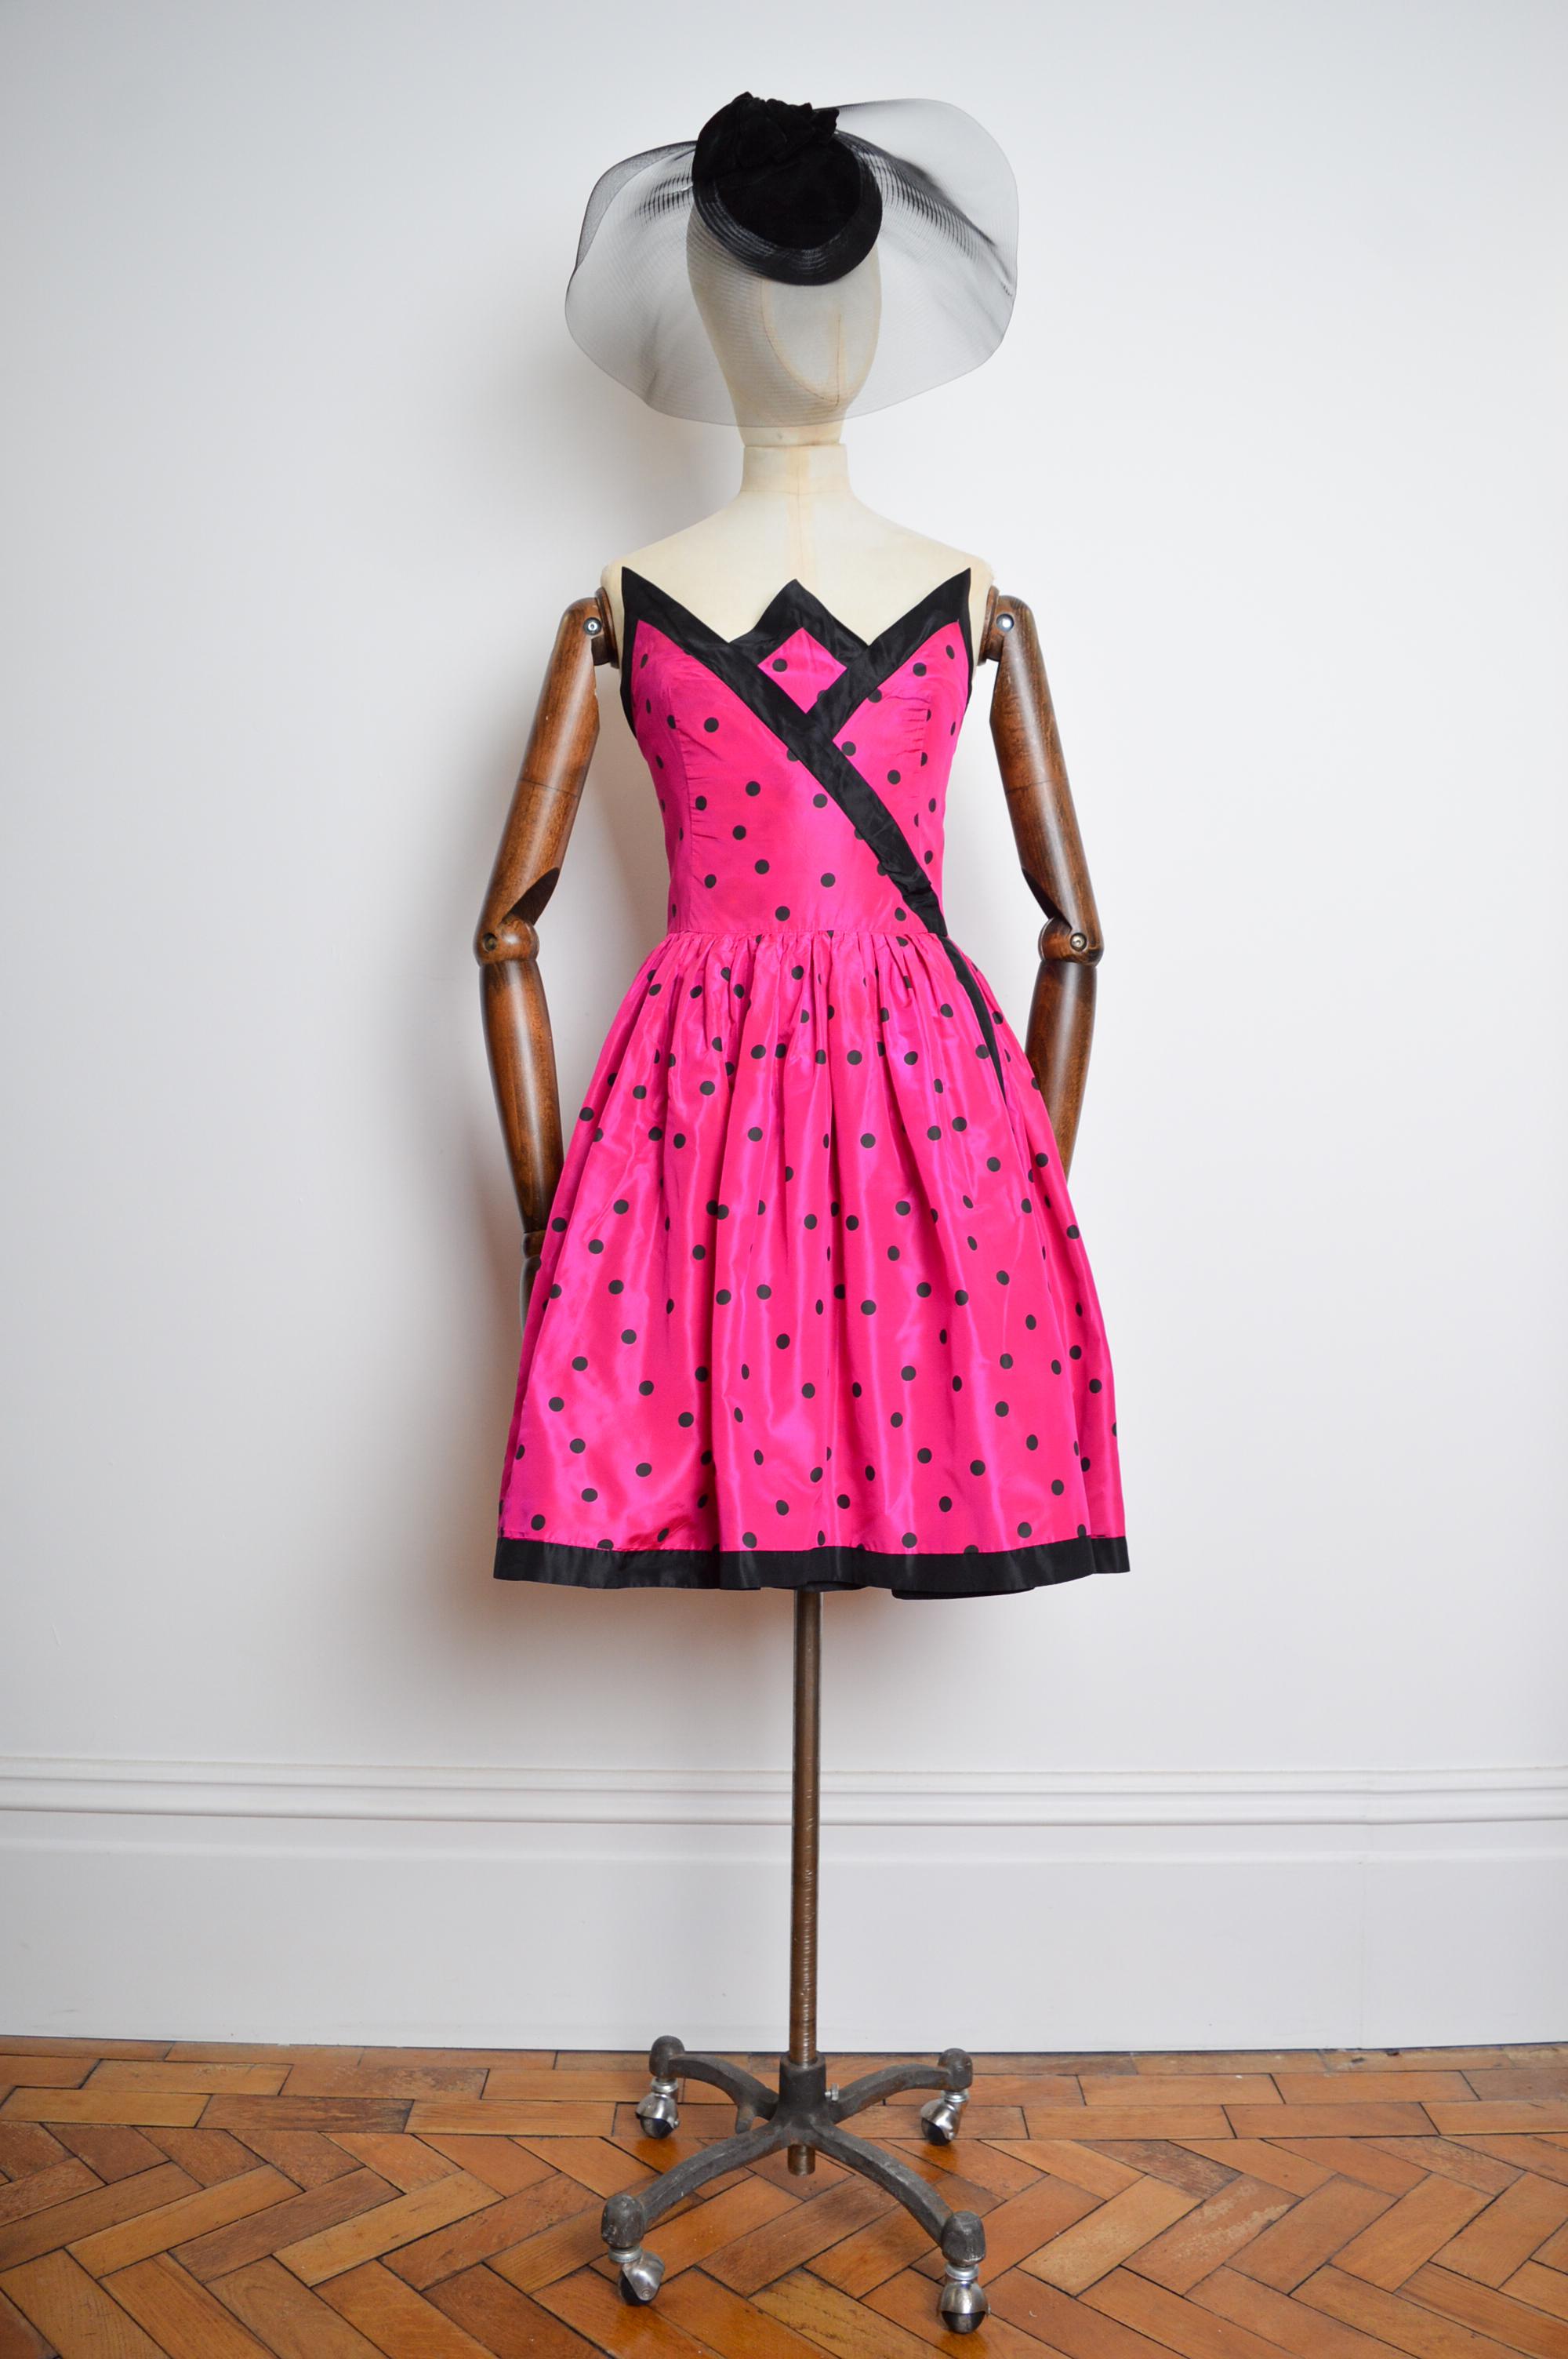 Beautiful BALENCIAGA Hot pink Polka dot cocktail dress by Josephus Thimister.

This strapless cocktail runway dress is crafted from a Moire silk fabric with a boned upper body, concealed zip up back.

MADE IN FRANCE.

Length 32